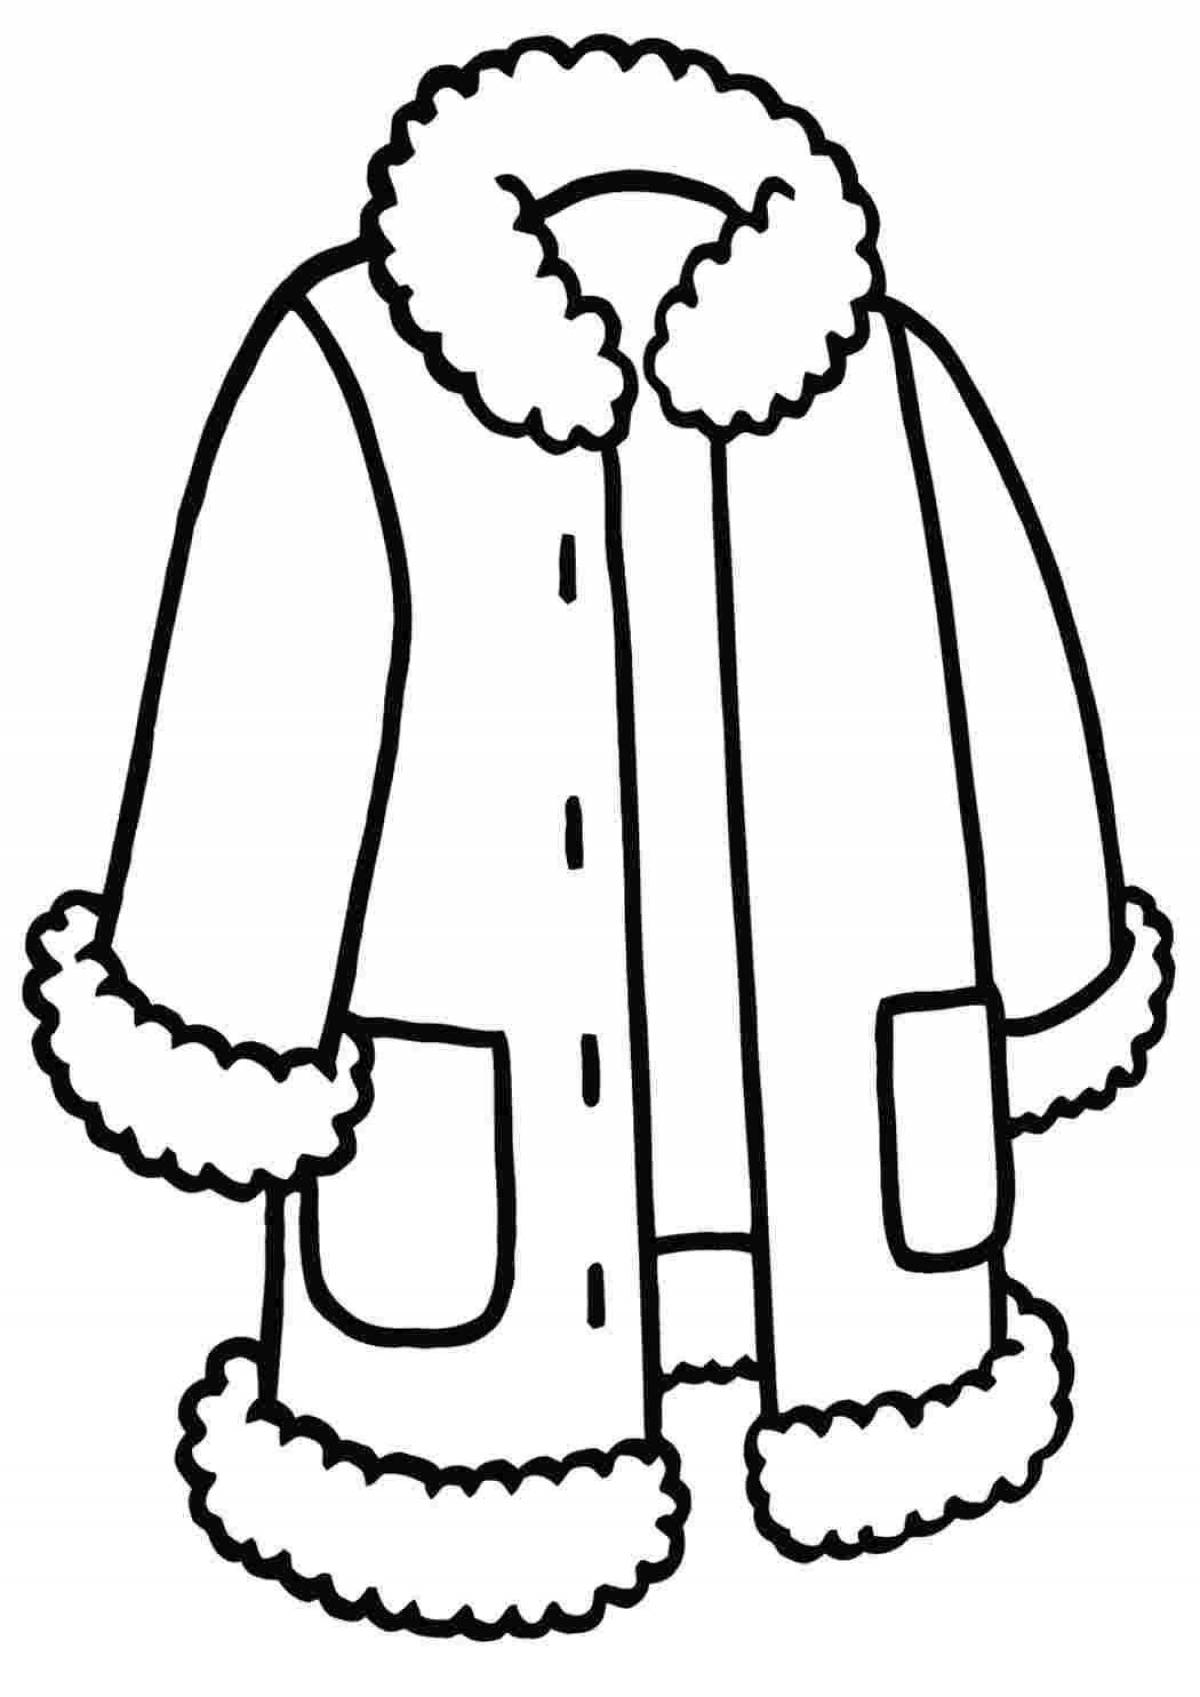 Amazing coat coloring page for kids